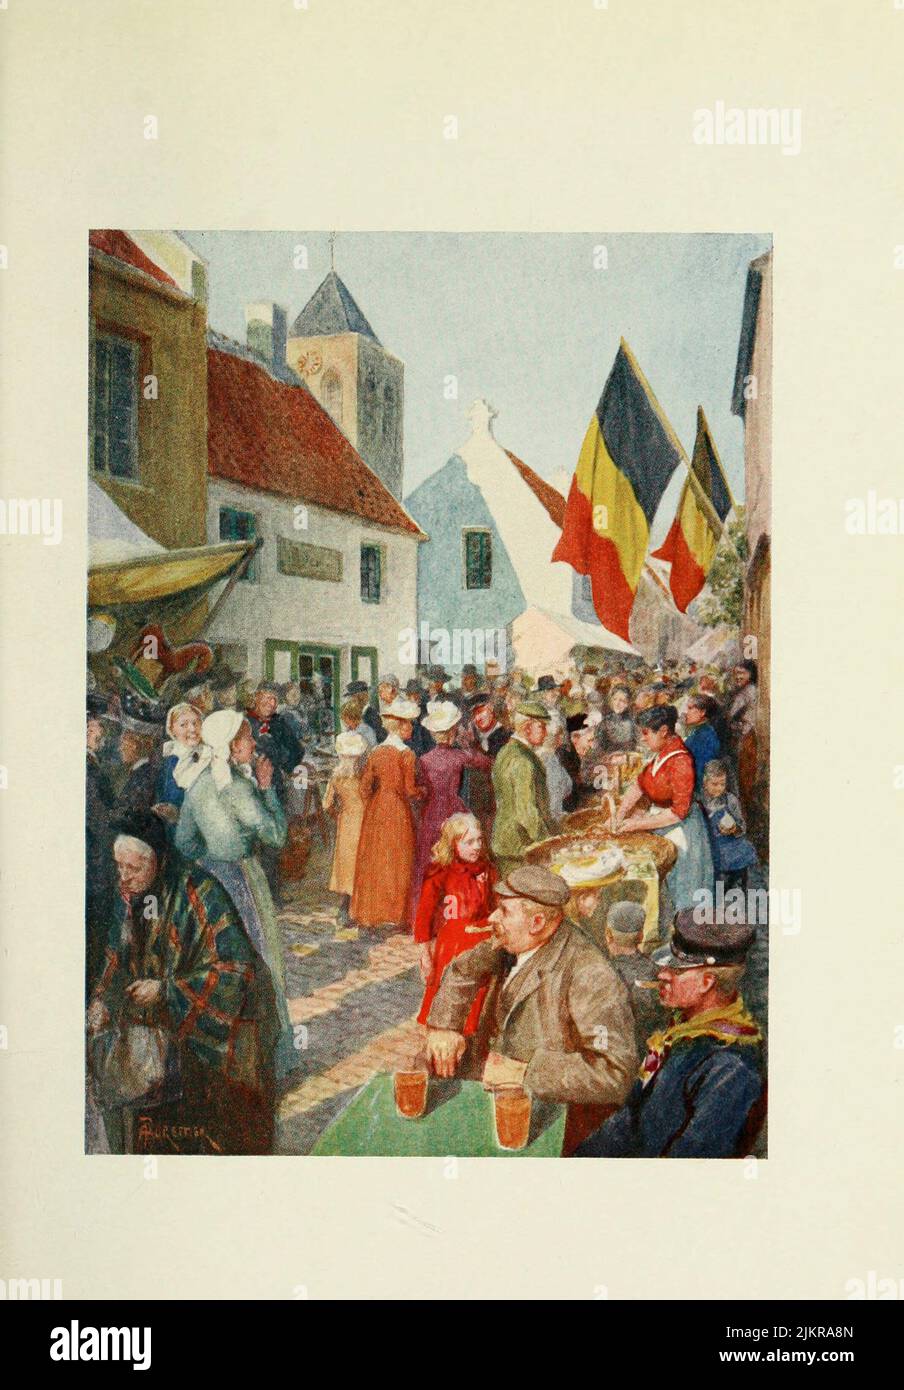 Adinkerque : At the Kermesse Painted by Amedee Forestier, from the book '  Bruges and West Flanders ' by George William Thomson Omond, Publication date 1906 Publisher London : A. & C. Black Sir Amédée Forestier (Paris 1854 – 18 November 1930 London) was an Anglo-French artist and illustrator who specialised in historical and prehistoric scenes, and landscapes. Stock Photo